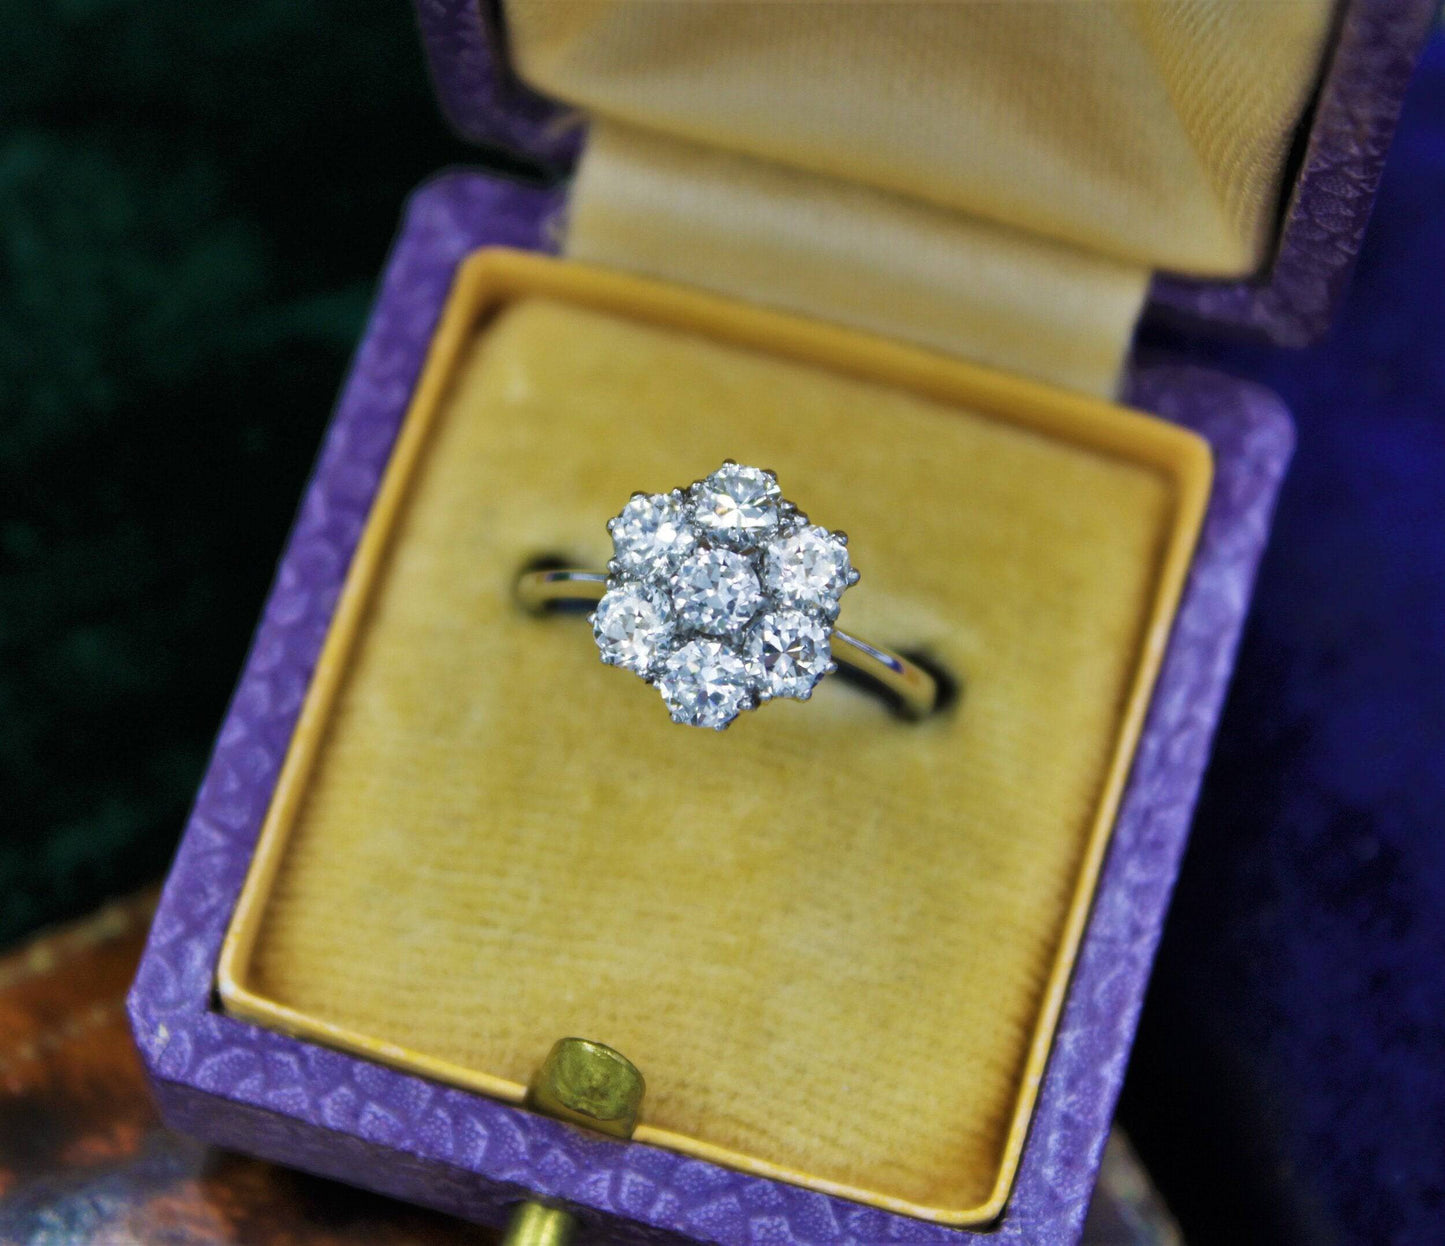 A very fine Transition-Cut Diamond Cluster Ring set in 18ct White Gold & Platinum, English, Circa 1930-1940 - Robin Haydock Antiques